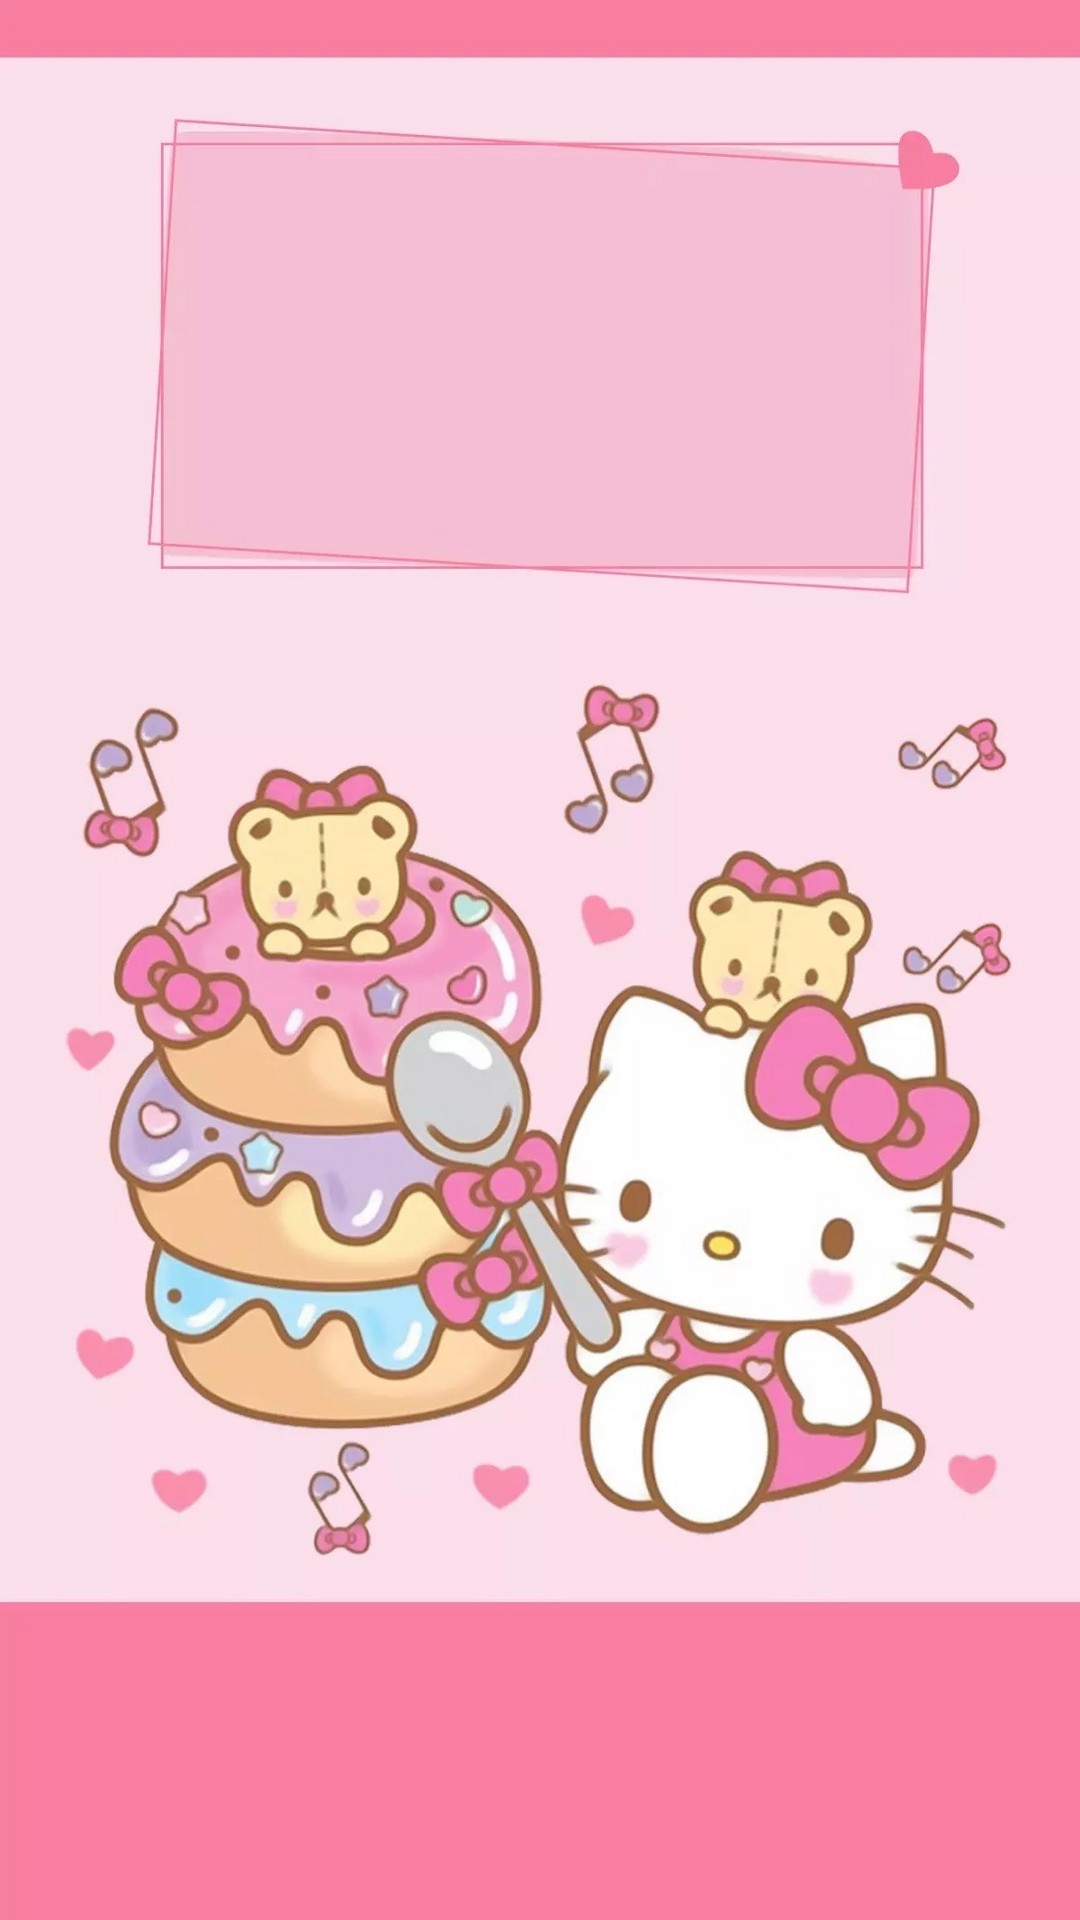 Hello Kitty iPhone 7 Wallpaper with resolution 1080X1920 pixel. You can use this wallpaper as background for your desktop Computer Screensavers, Android or iPhone smartphones